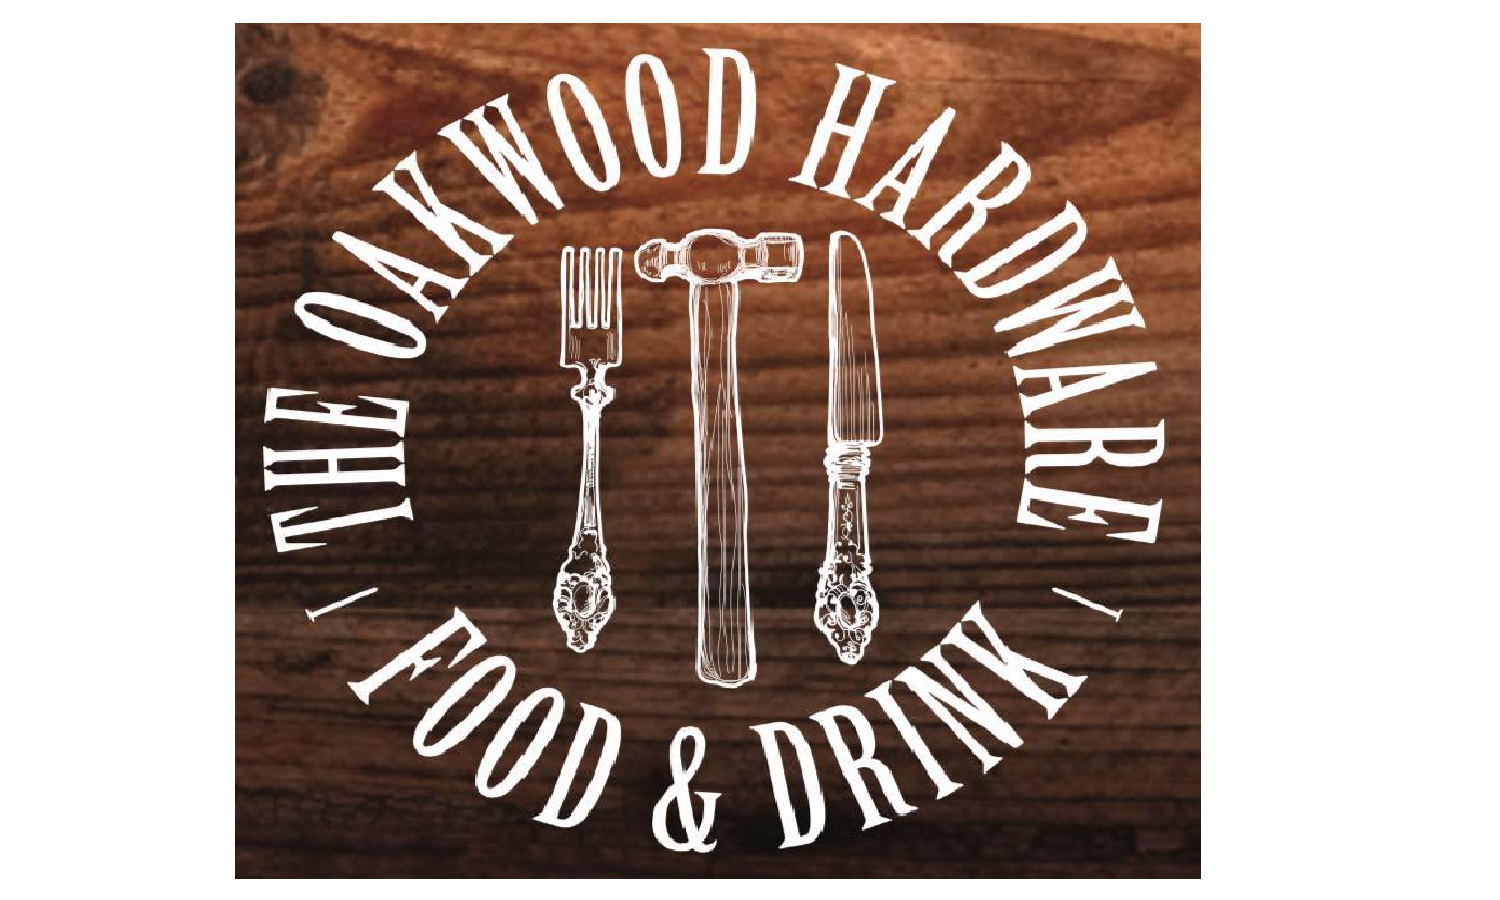 The Oakwood Hardware Food and Drink